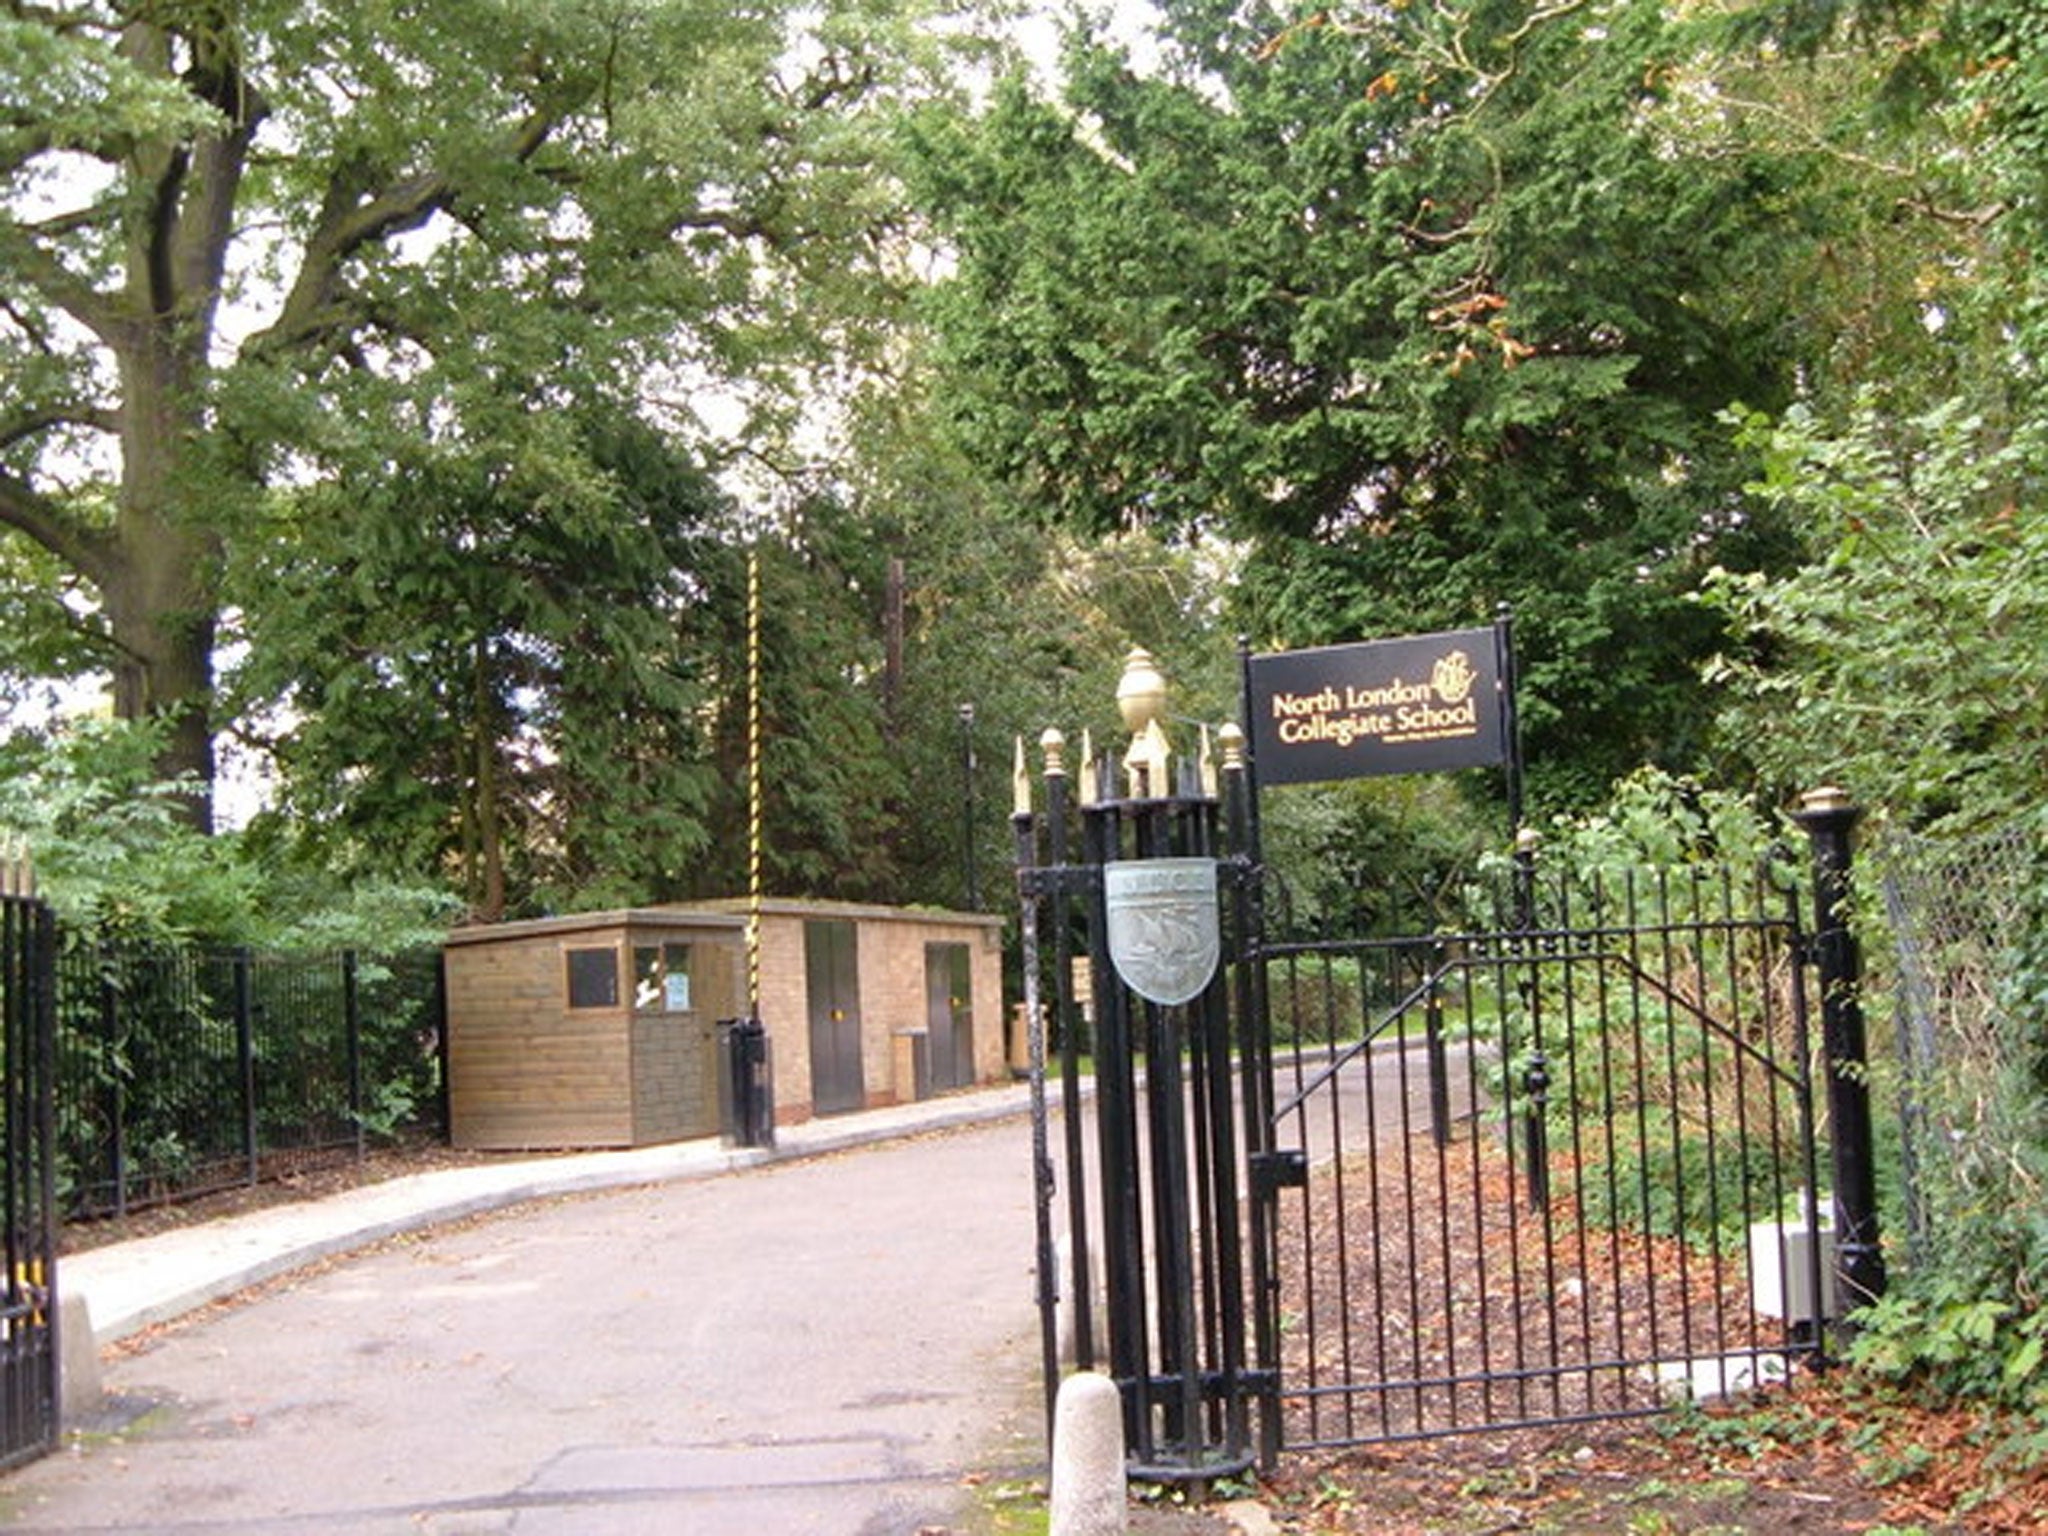 The entrance to the North London Collegiate School (for Girls) in Edgware, Middlesex